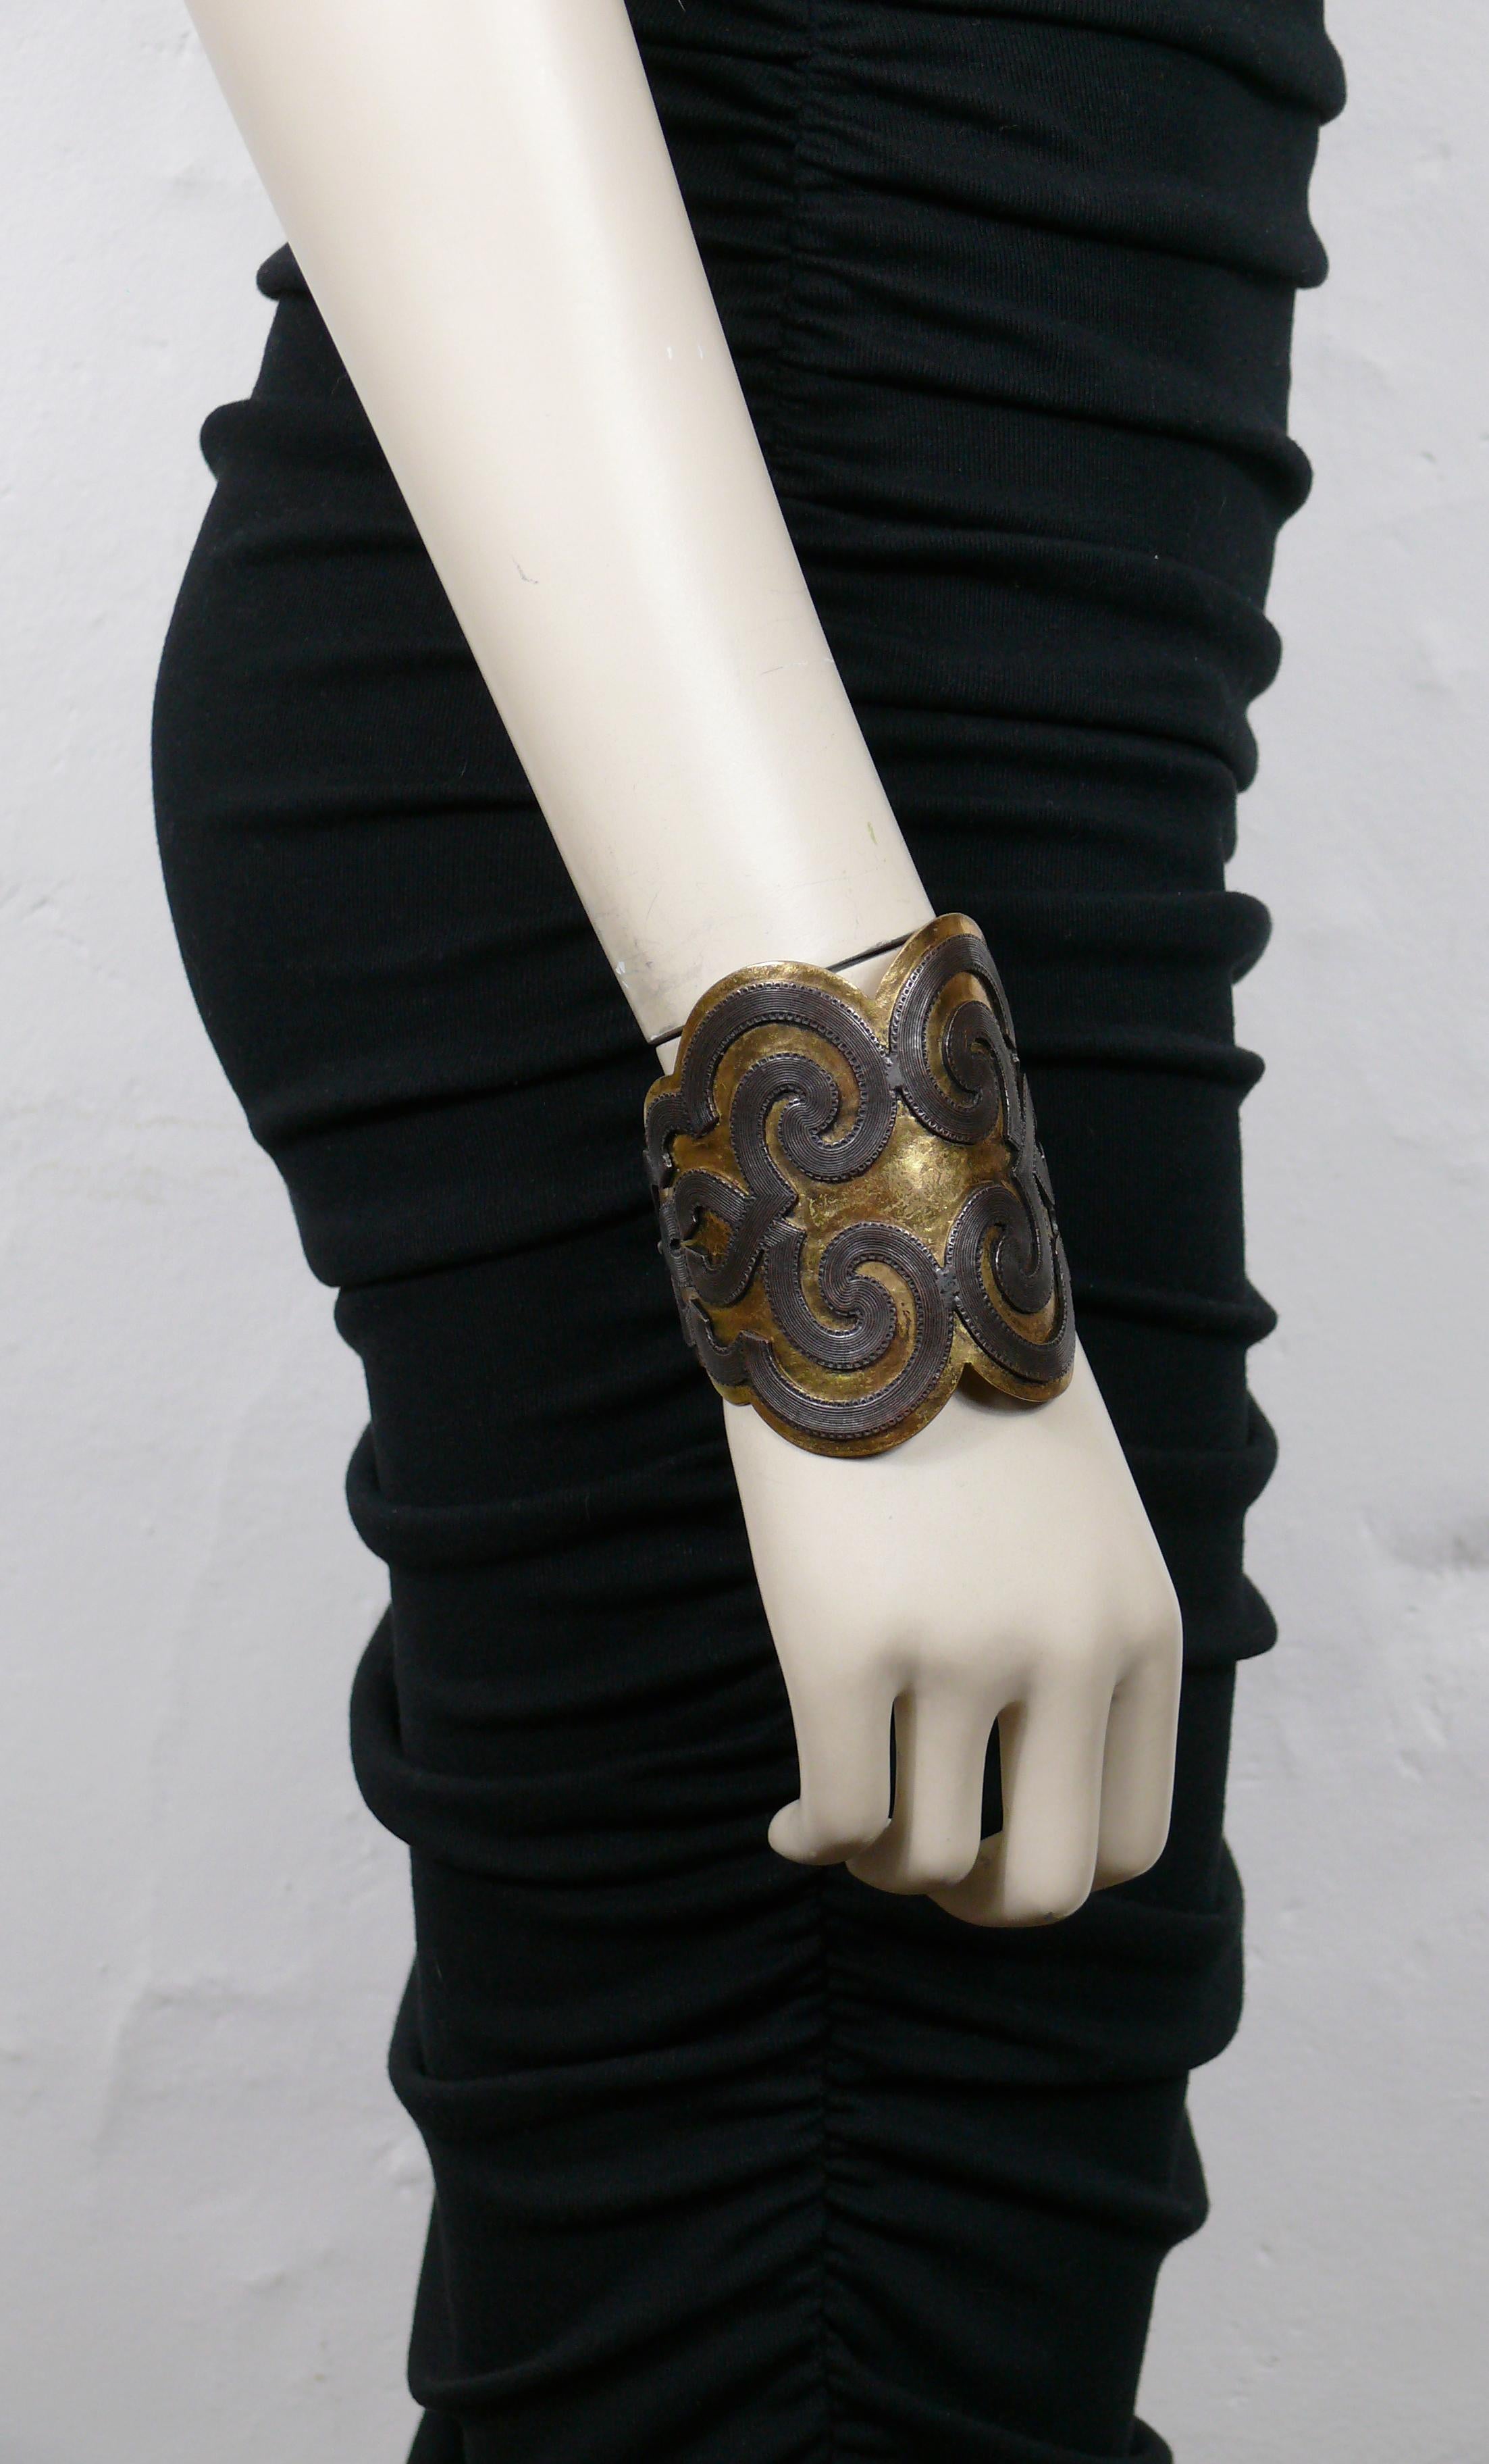 YVES SAINT LAURENT vintage hammered gold tone cuff bracelet featuring a bronze tone arabesque design onlaid.

Embossed YSL.

Indicative measurements : inner circumference approx. 18.85 cm (7.42 inches) / max. width approx. 7.8 cm (3.07 inches) /